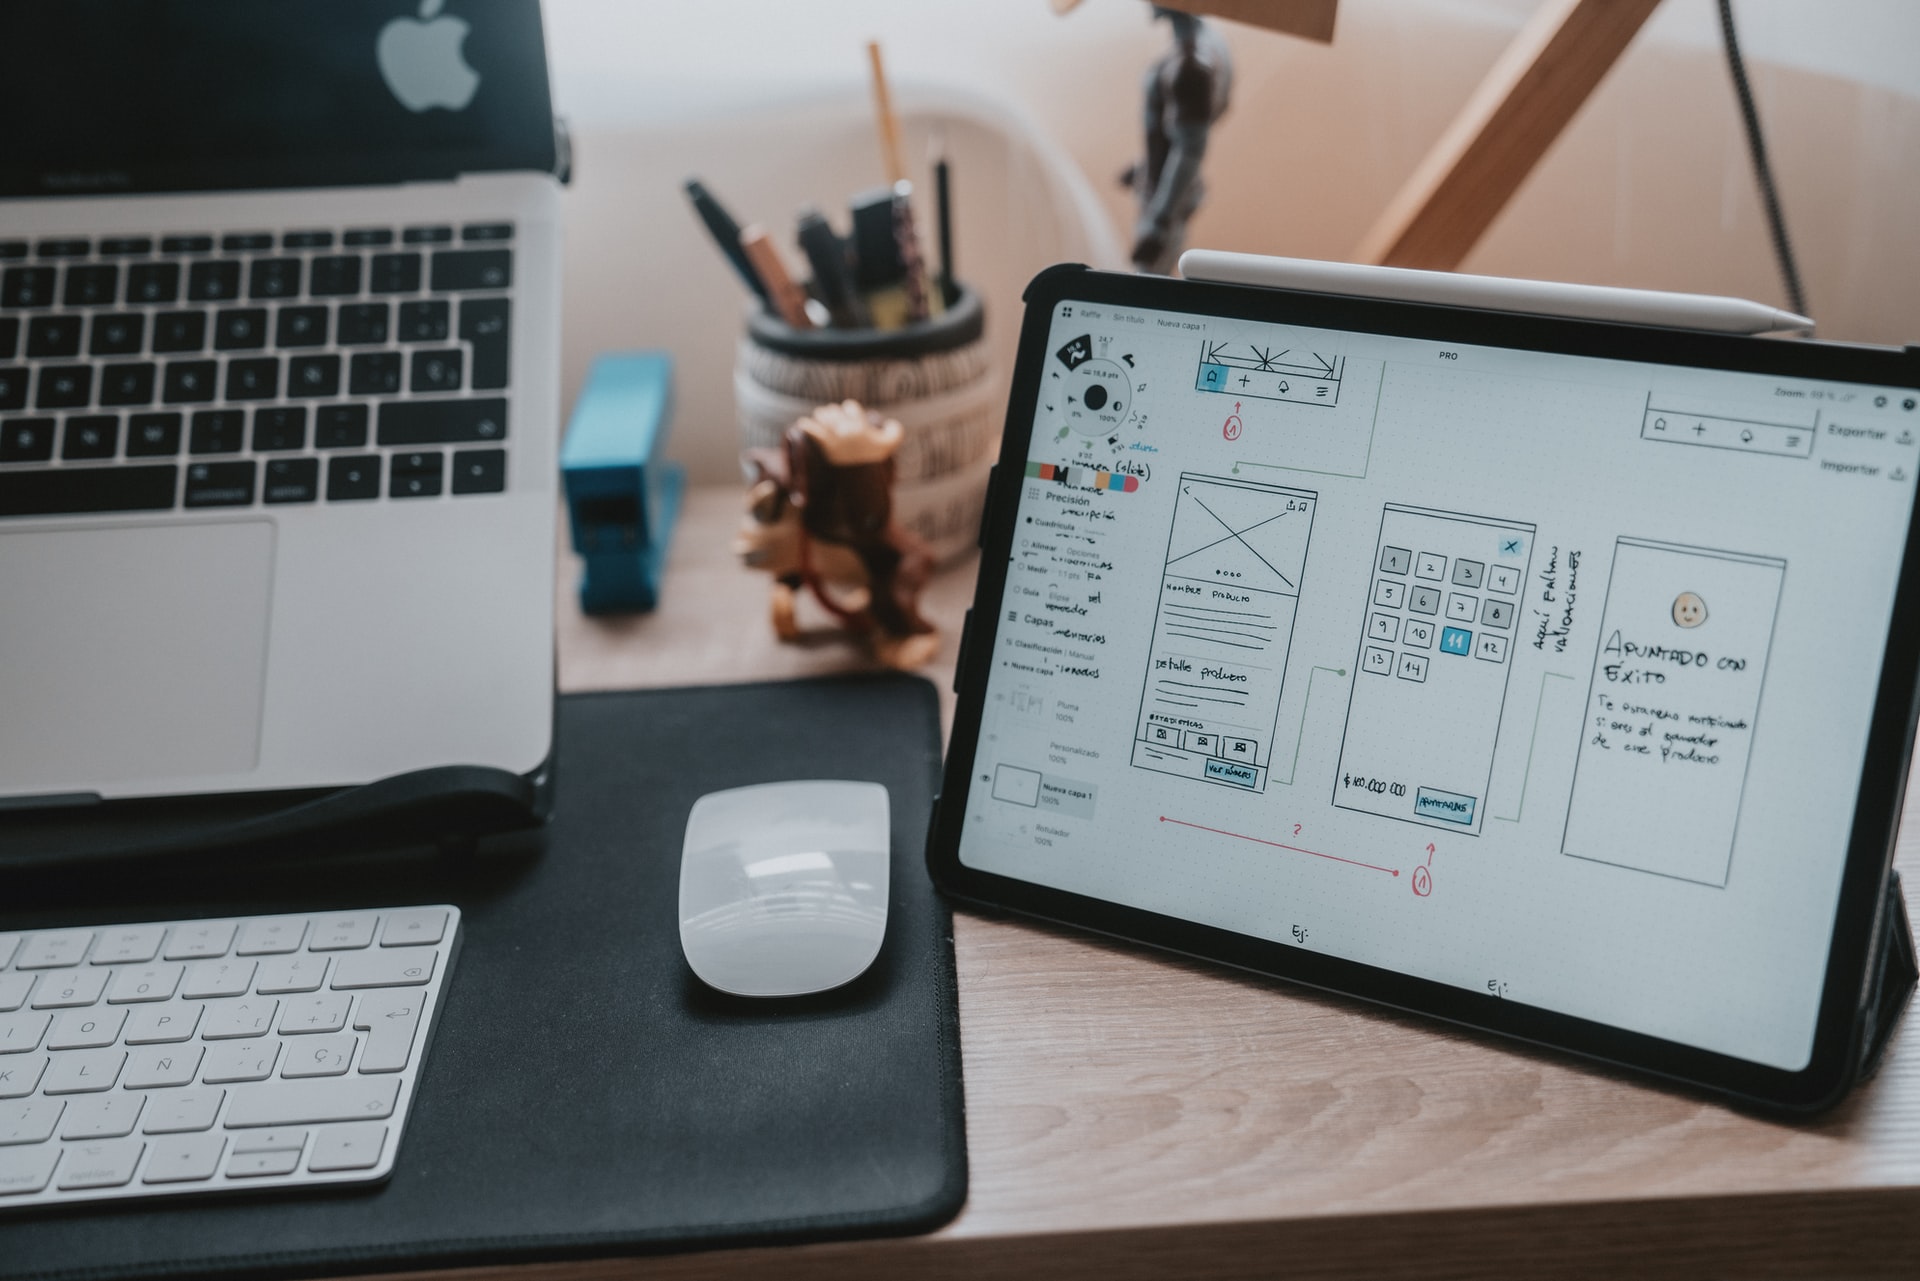 Six Leading UI Design Trends To Follow In 2022